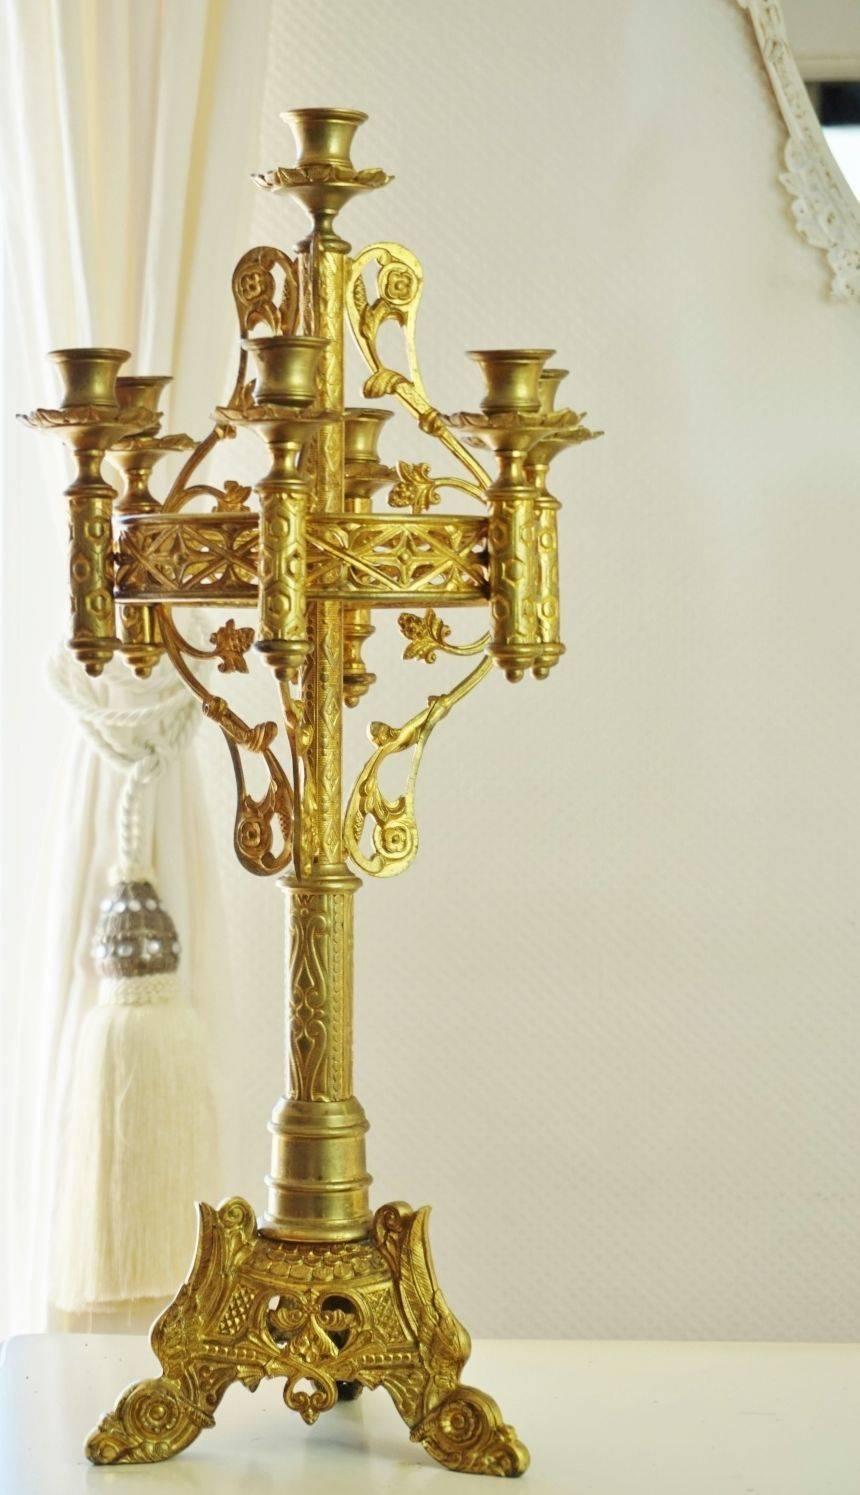 Large and heavy 19th century Gothic church candelabra.
Gilt bronze and old brass with very detailing ornaments in high
quality casting, with seven candle holders on a circular open ornate bracket.

Dimensions:
Height: 25 in (63.5 cm)
Diameter: